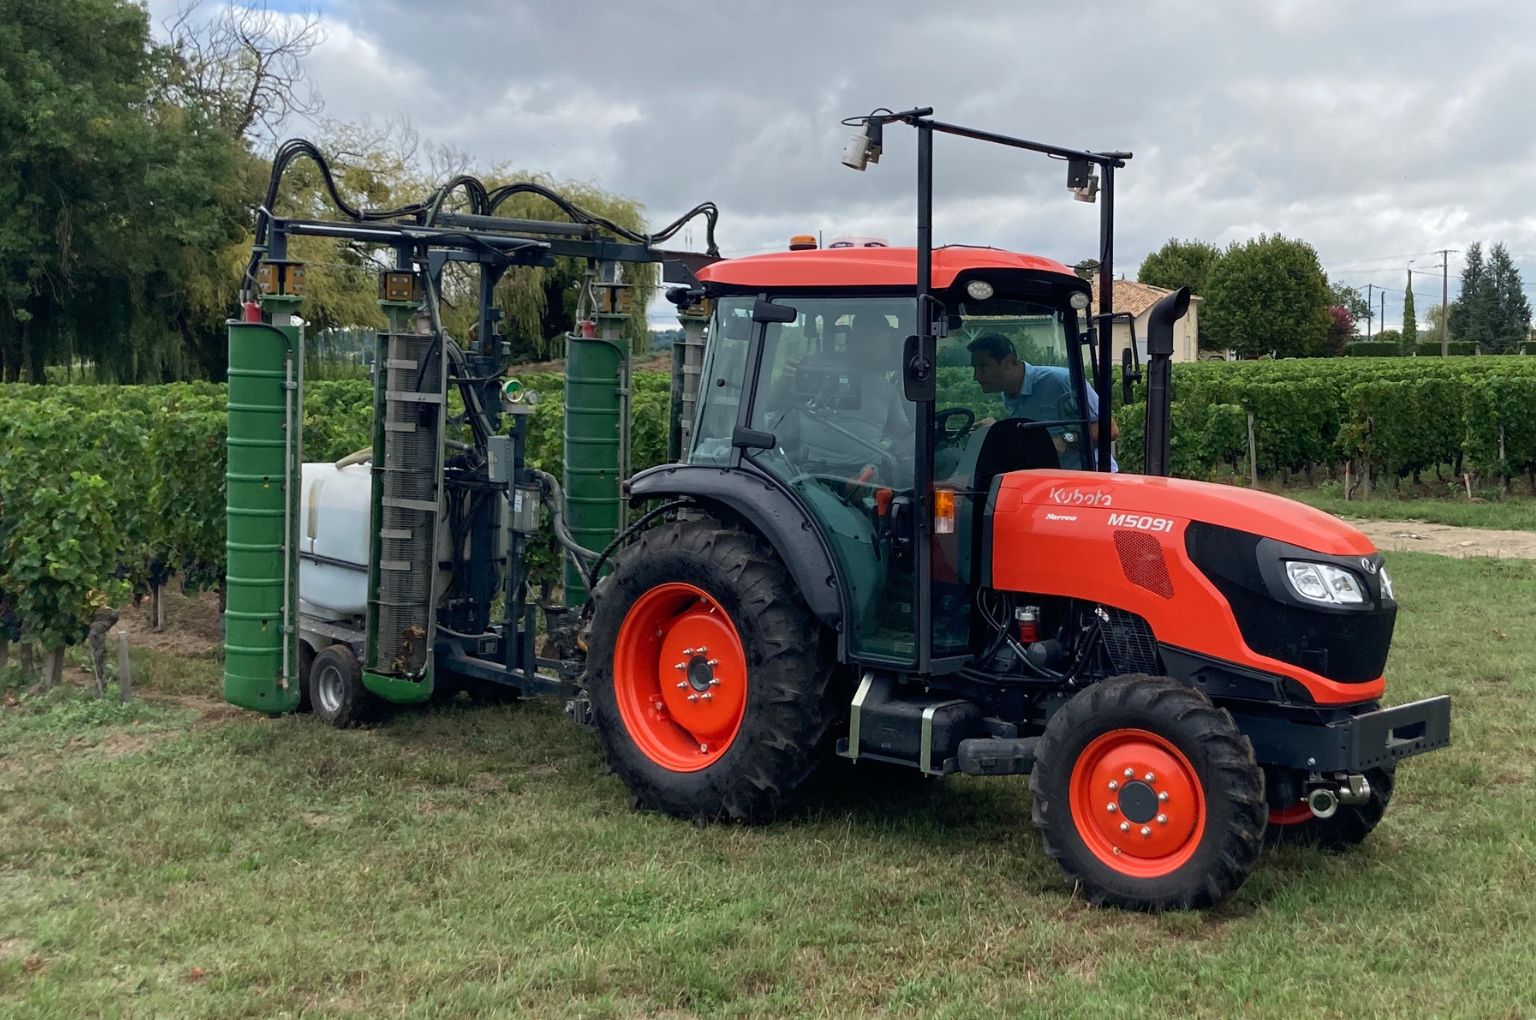 Kubota invests in Chouette from France